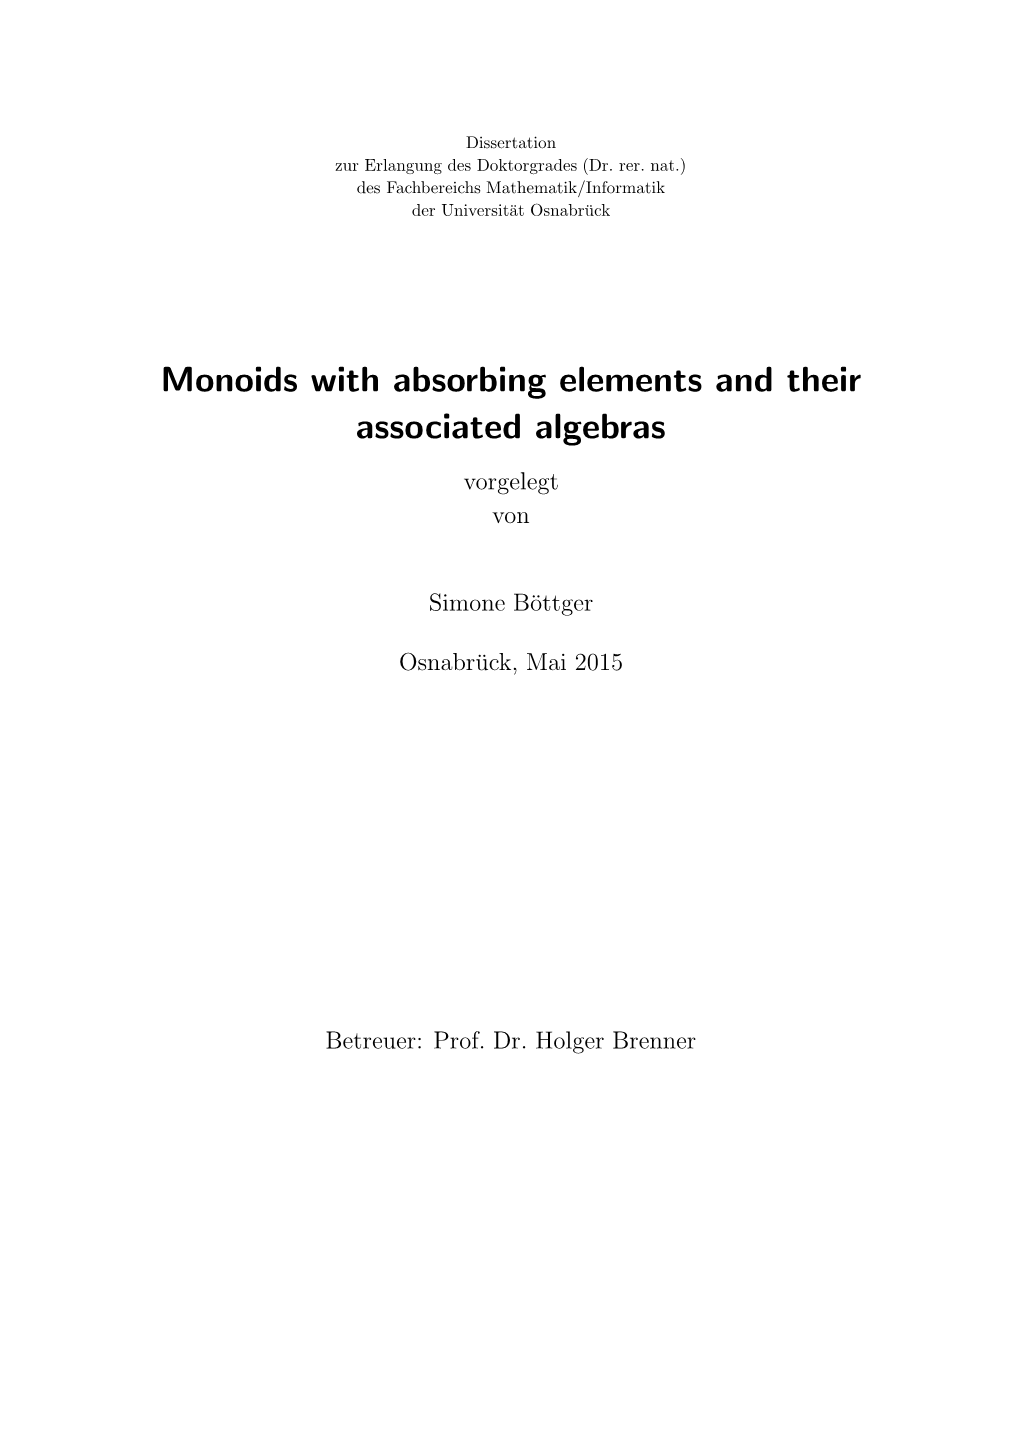 Monoids with Absorbing Elements and Their Associated Algebras